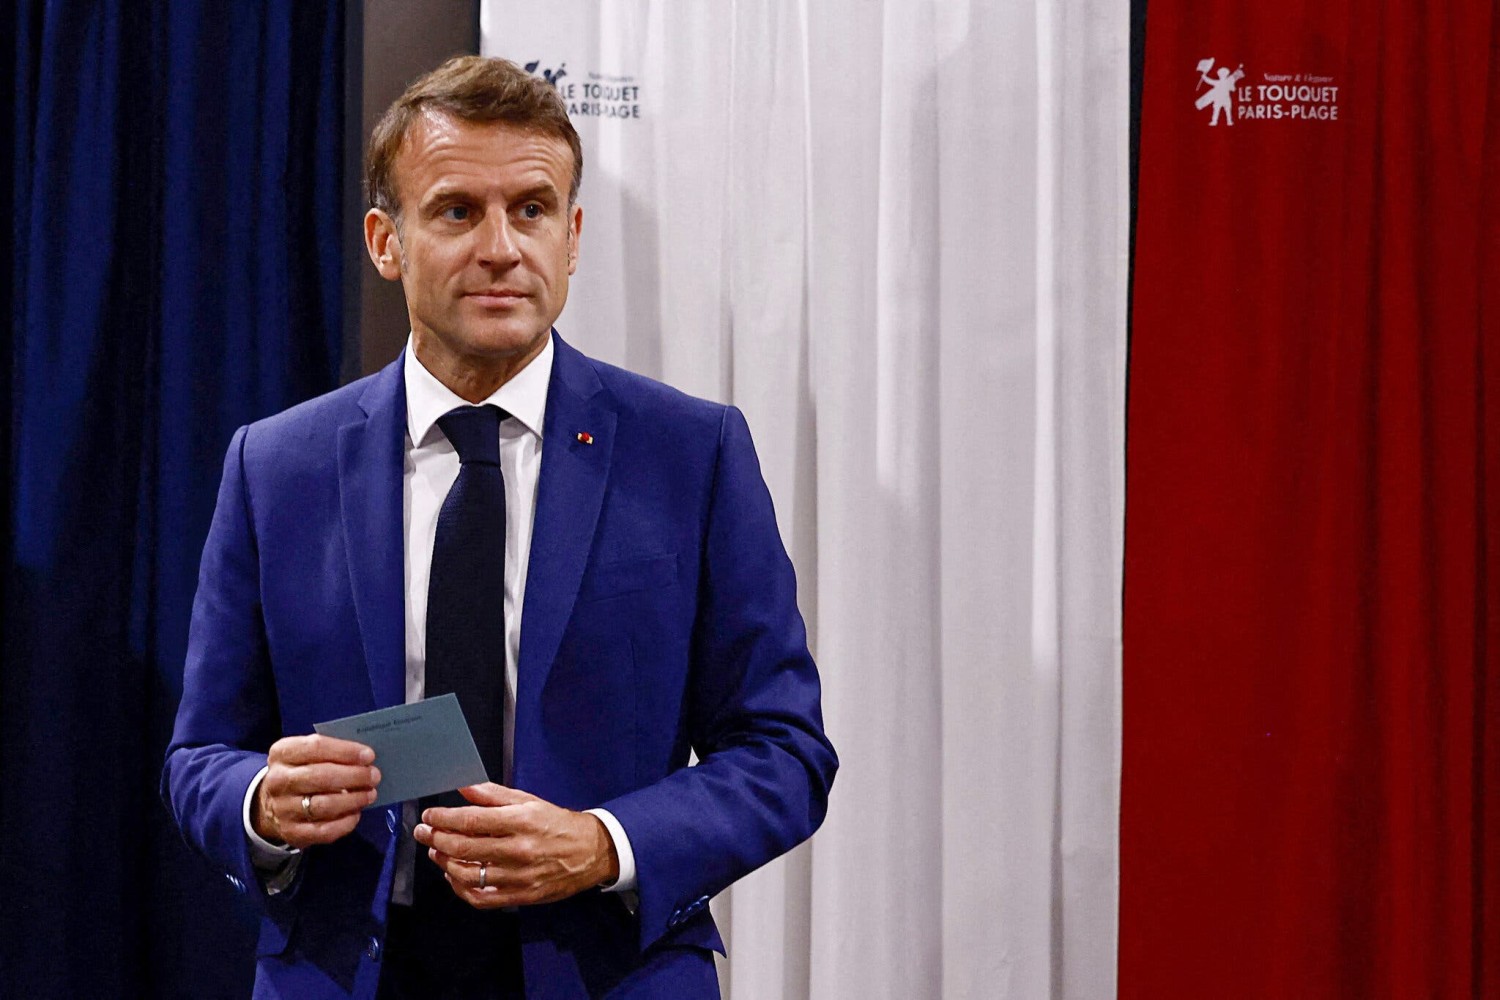 President Emmanuel Macron of France at a polling station in Le Touquet, northern France, on Sunday.Credit...Pool photo by Yara Nardi